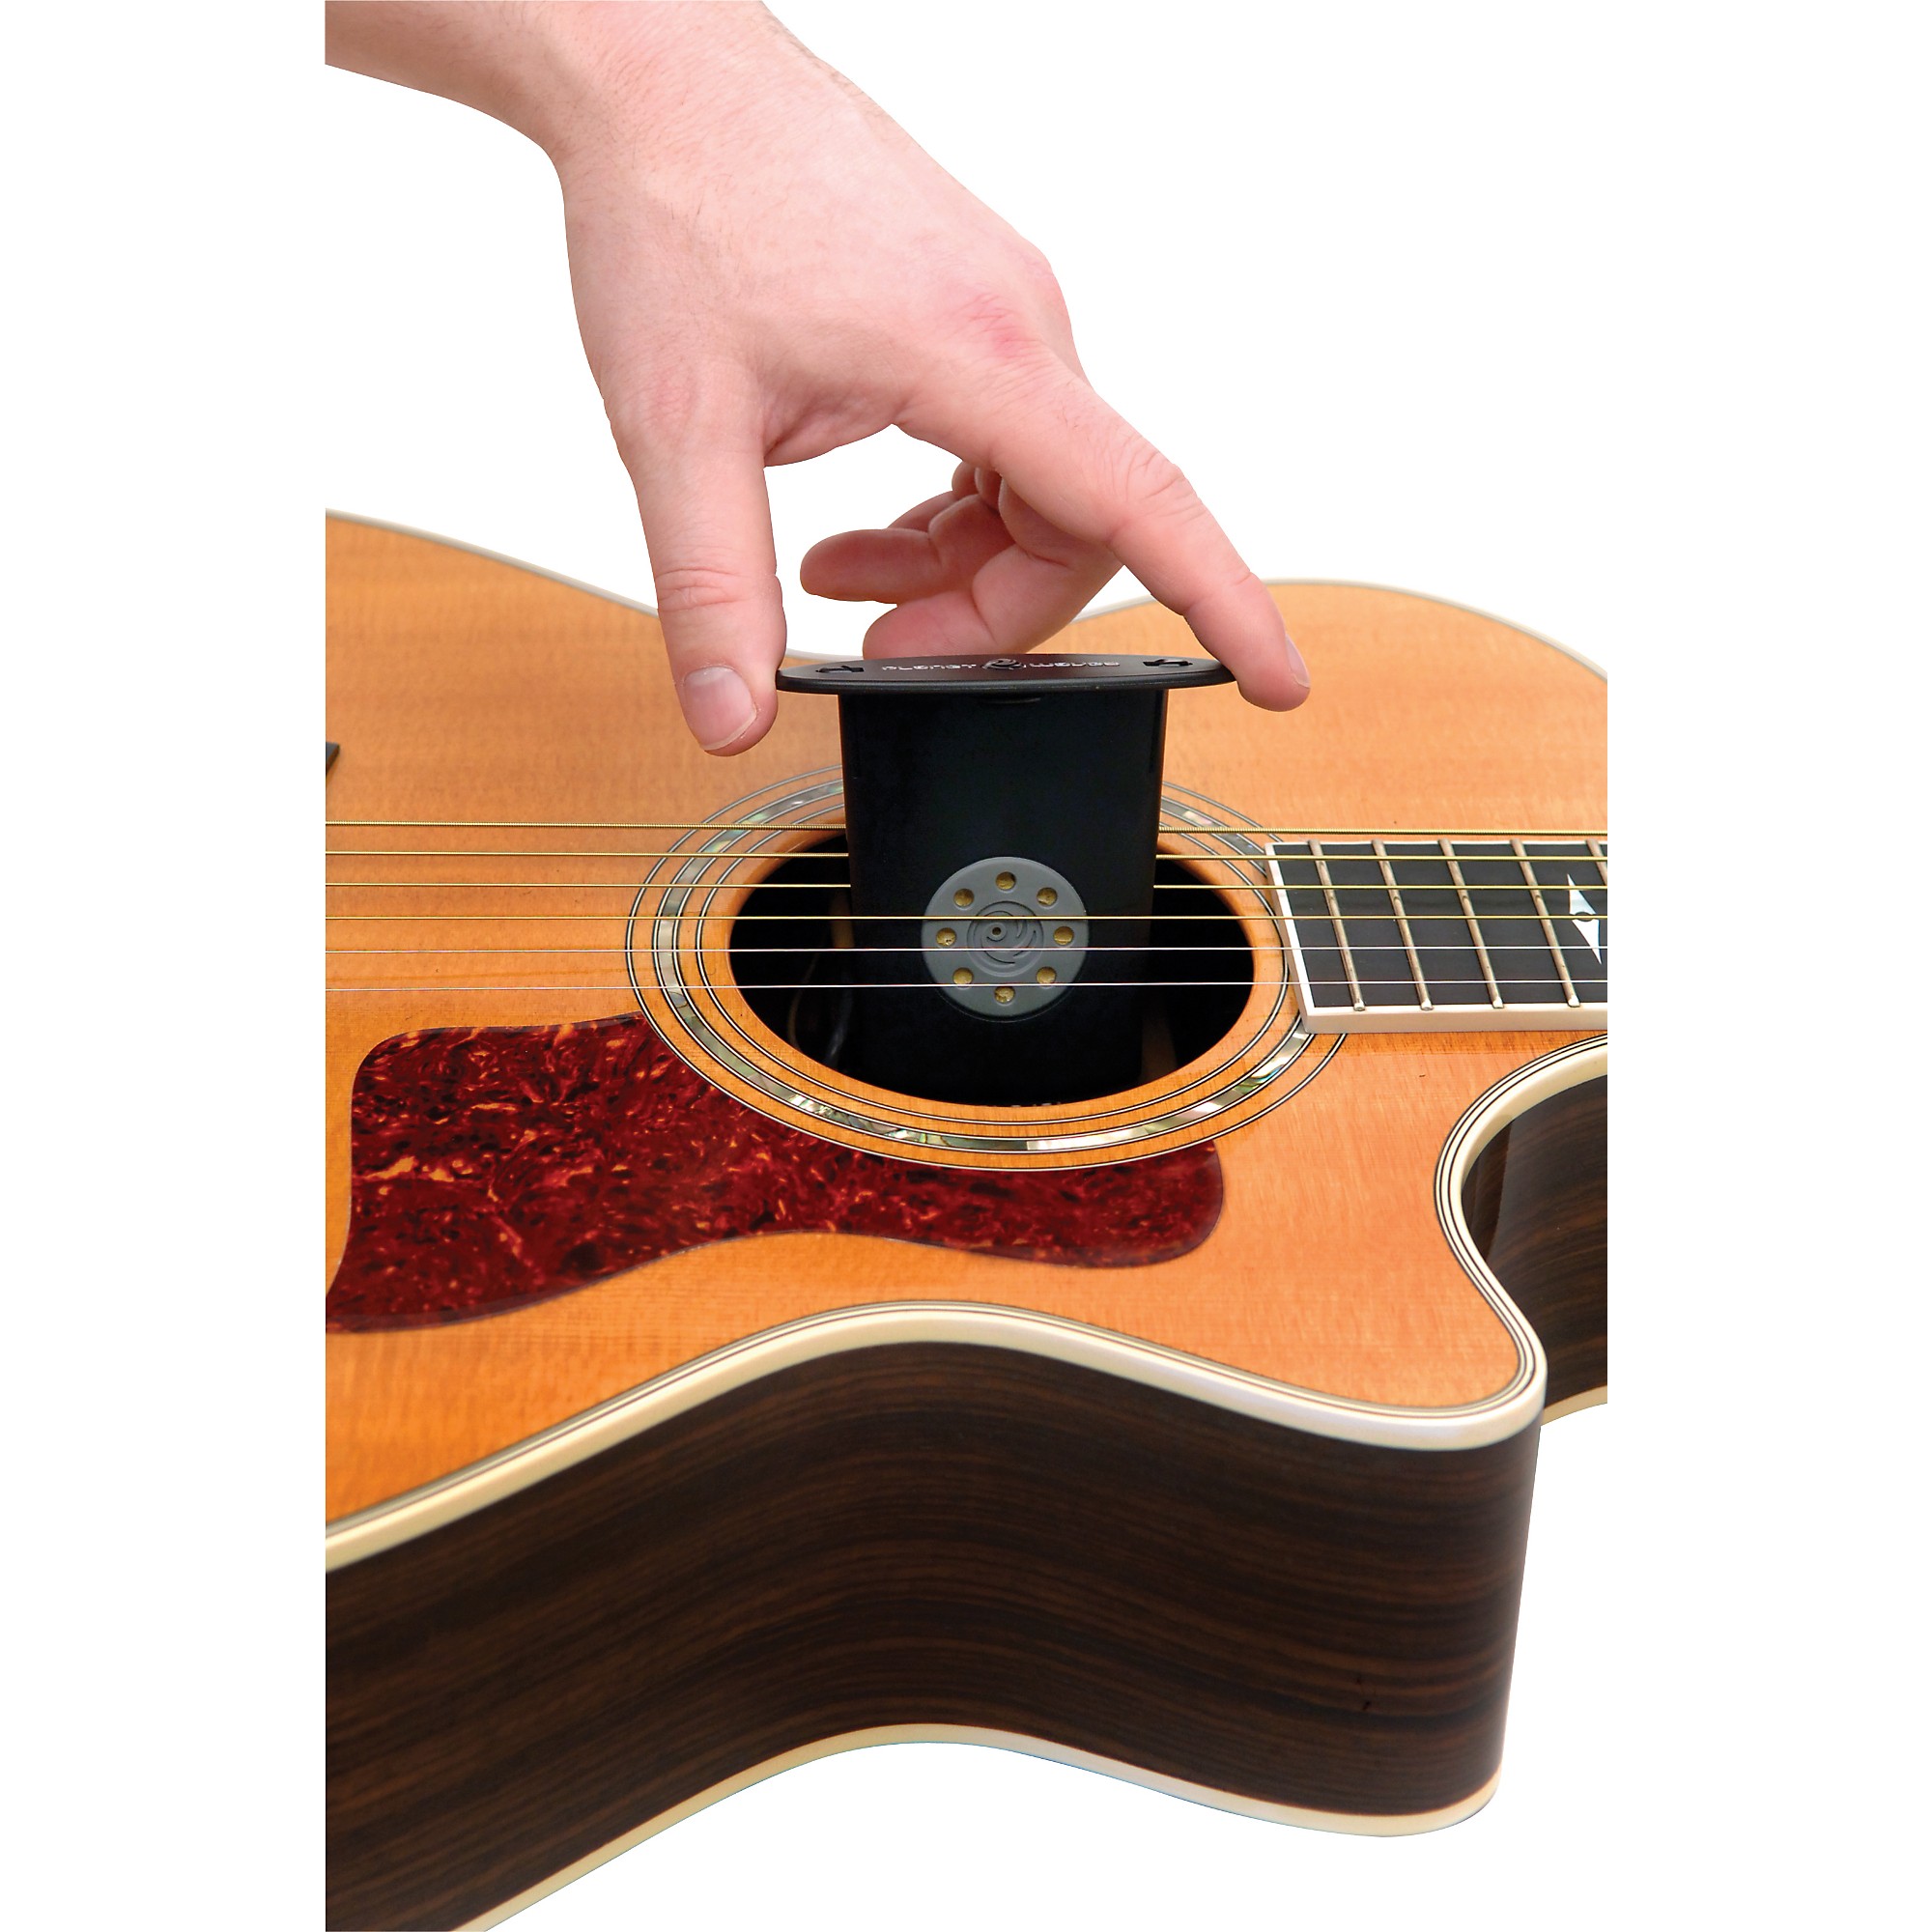 D'Addario Planet Waves Acoustic Guitar Humidifier